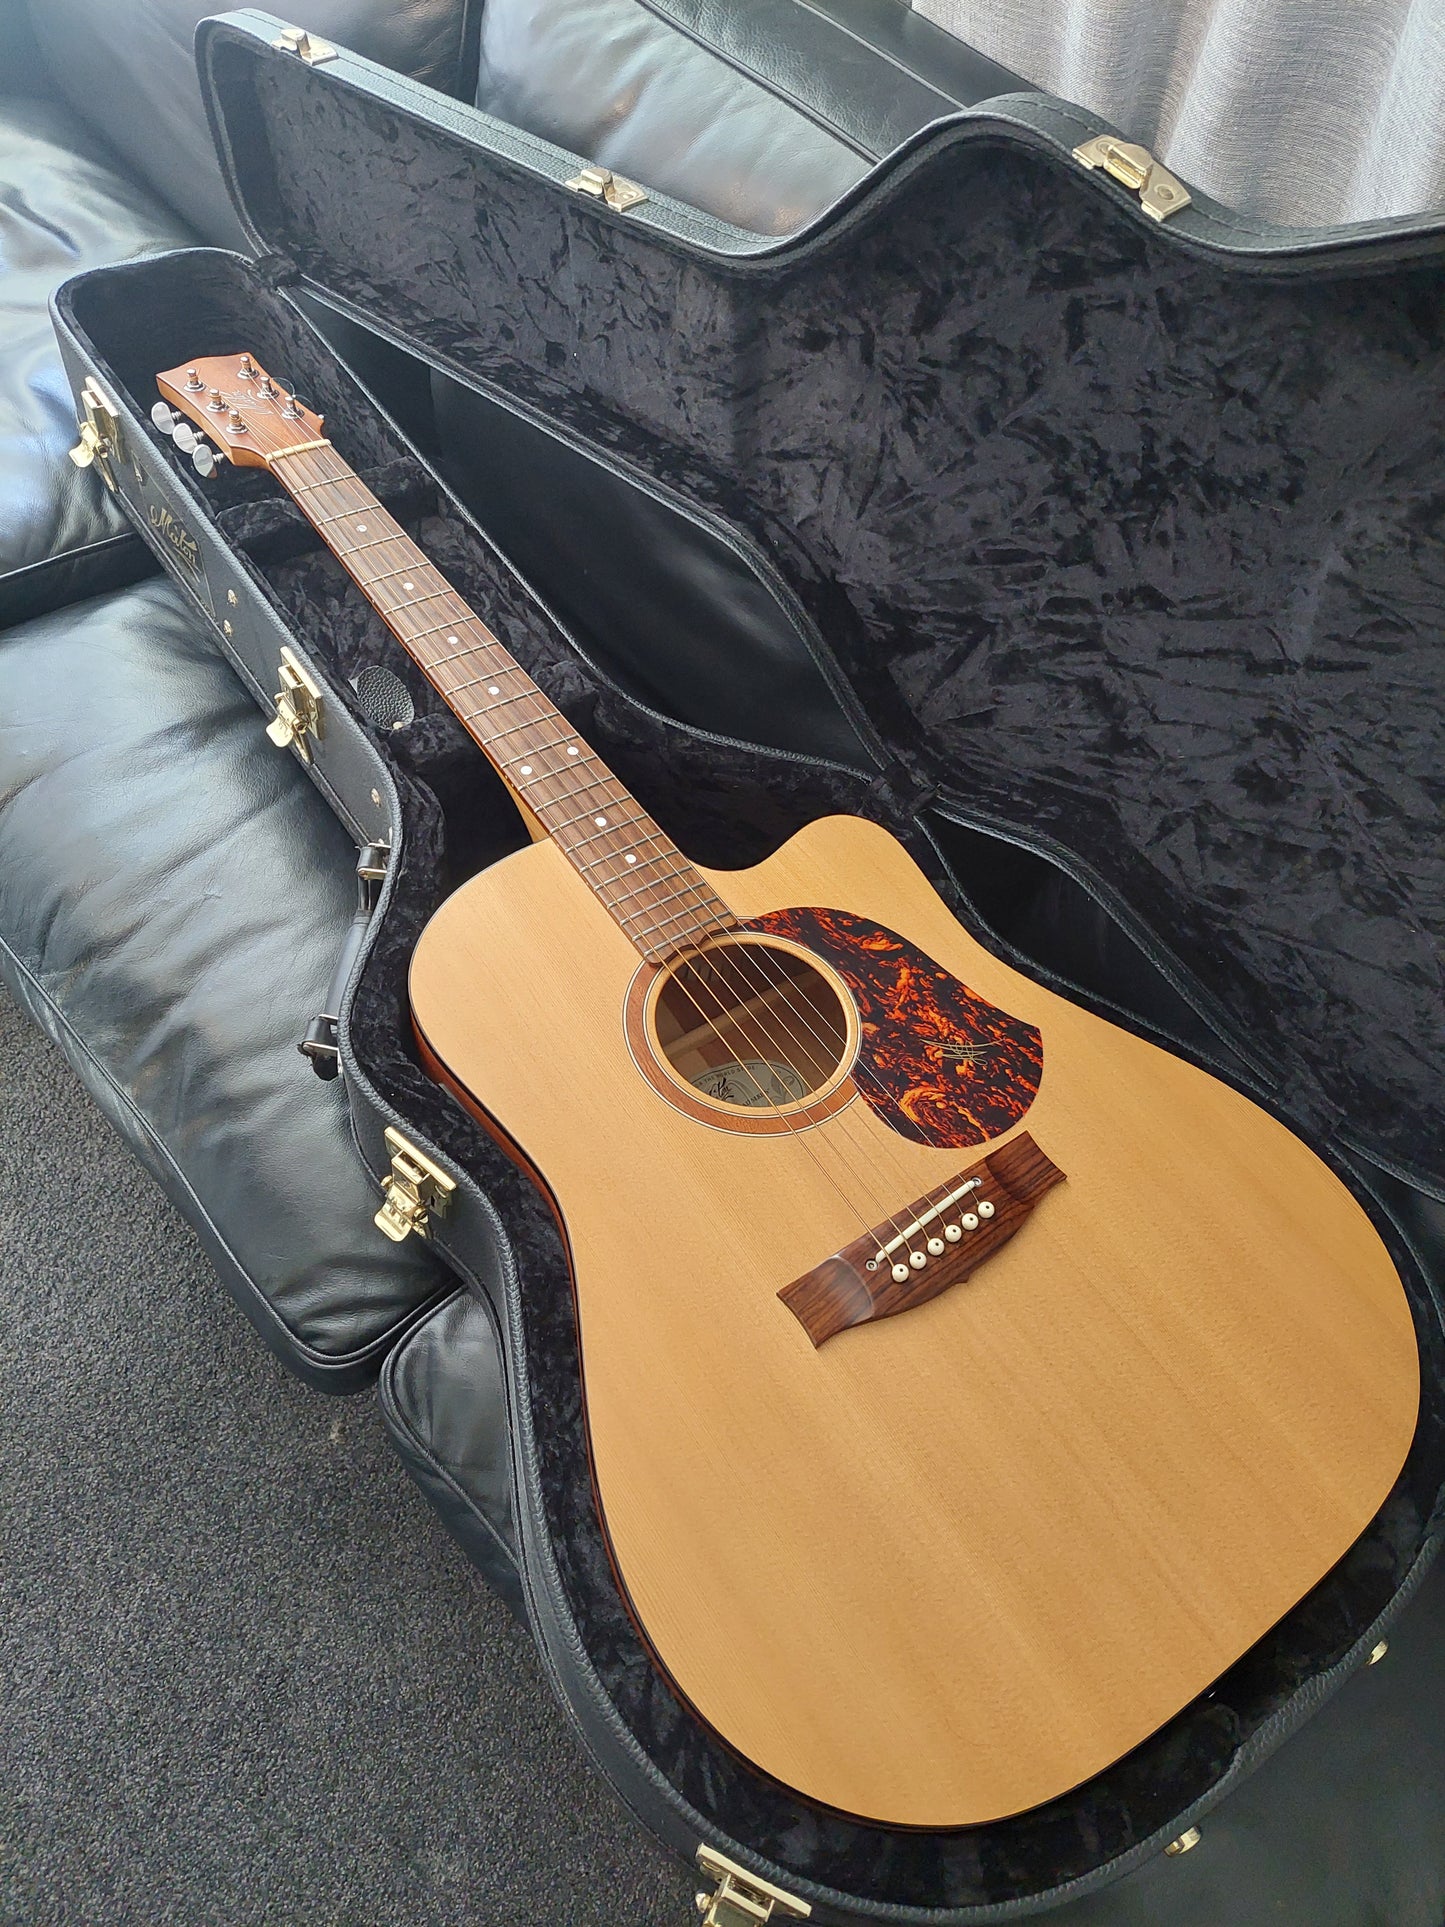 Pre-Owned Maton Acoustic Guitar SRS70C